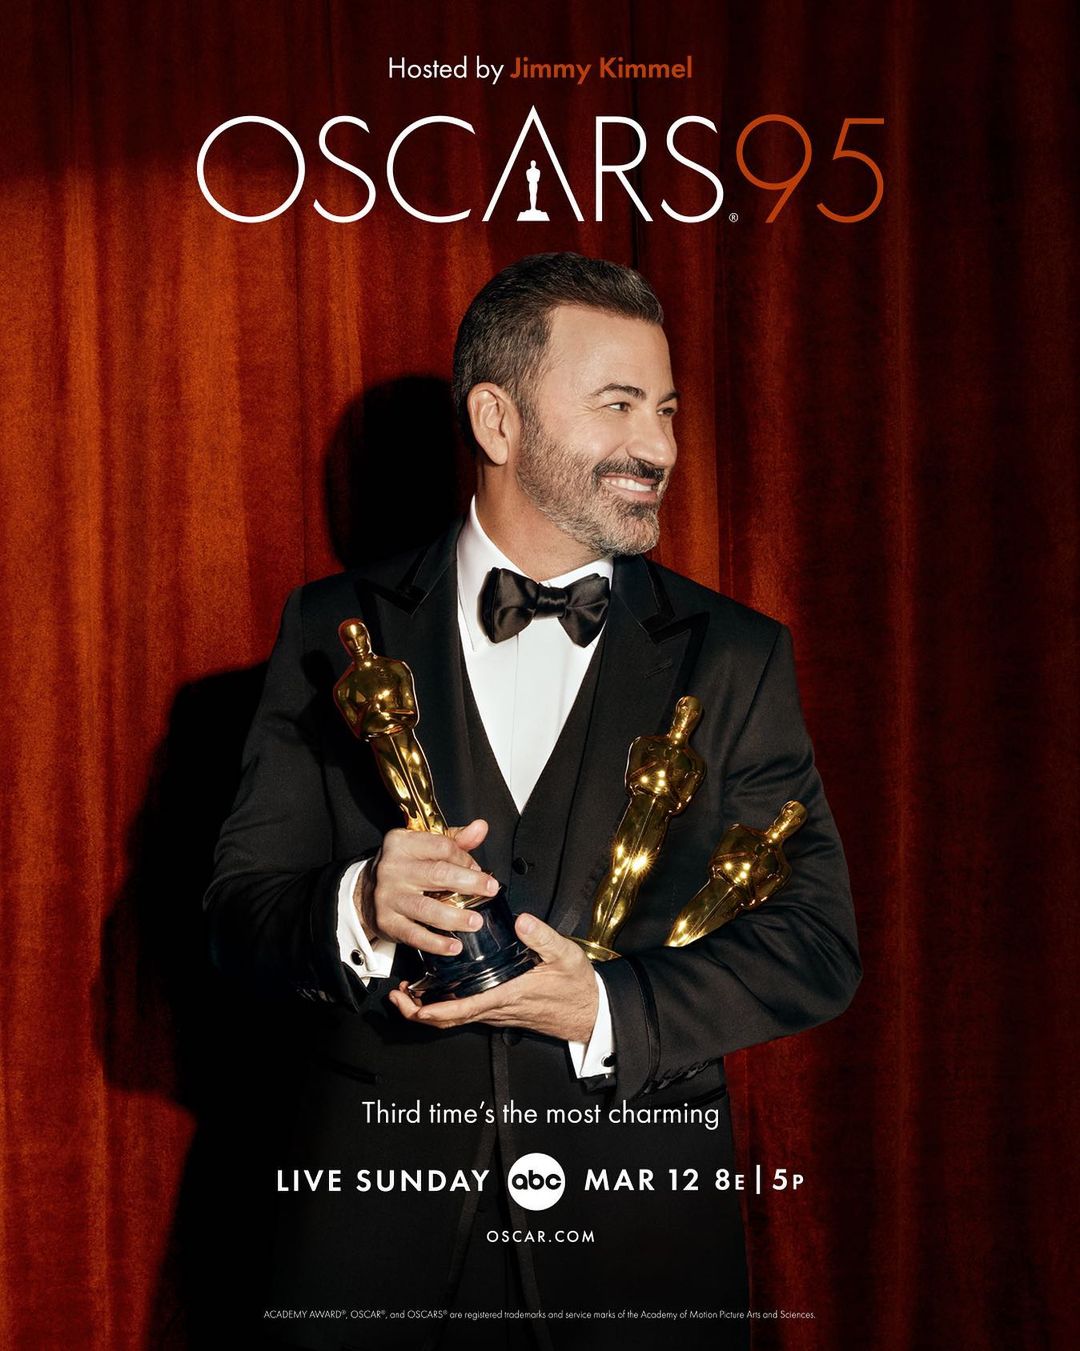 Oscars official announcement from Jimmy Kimmel